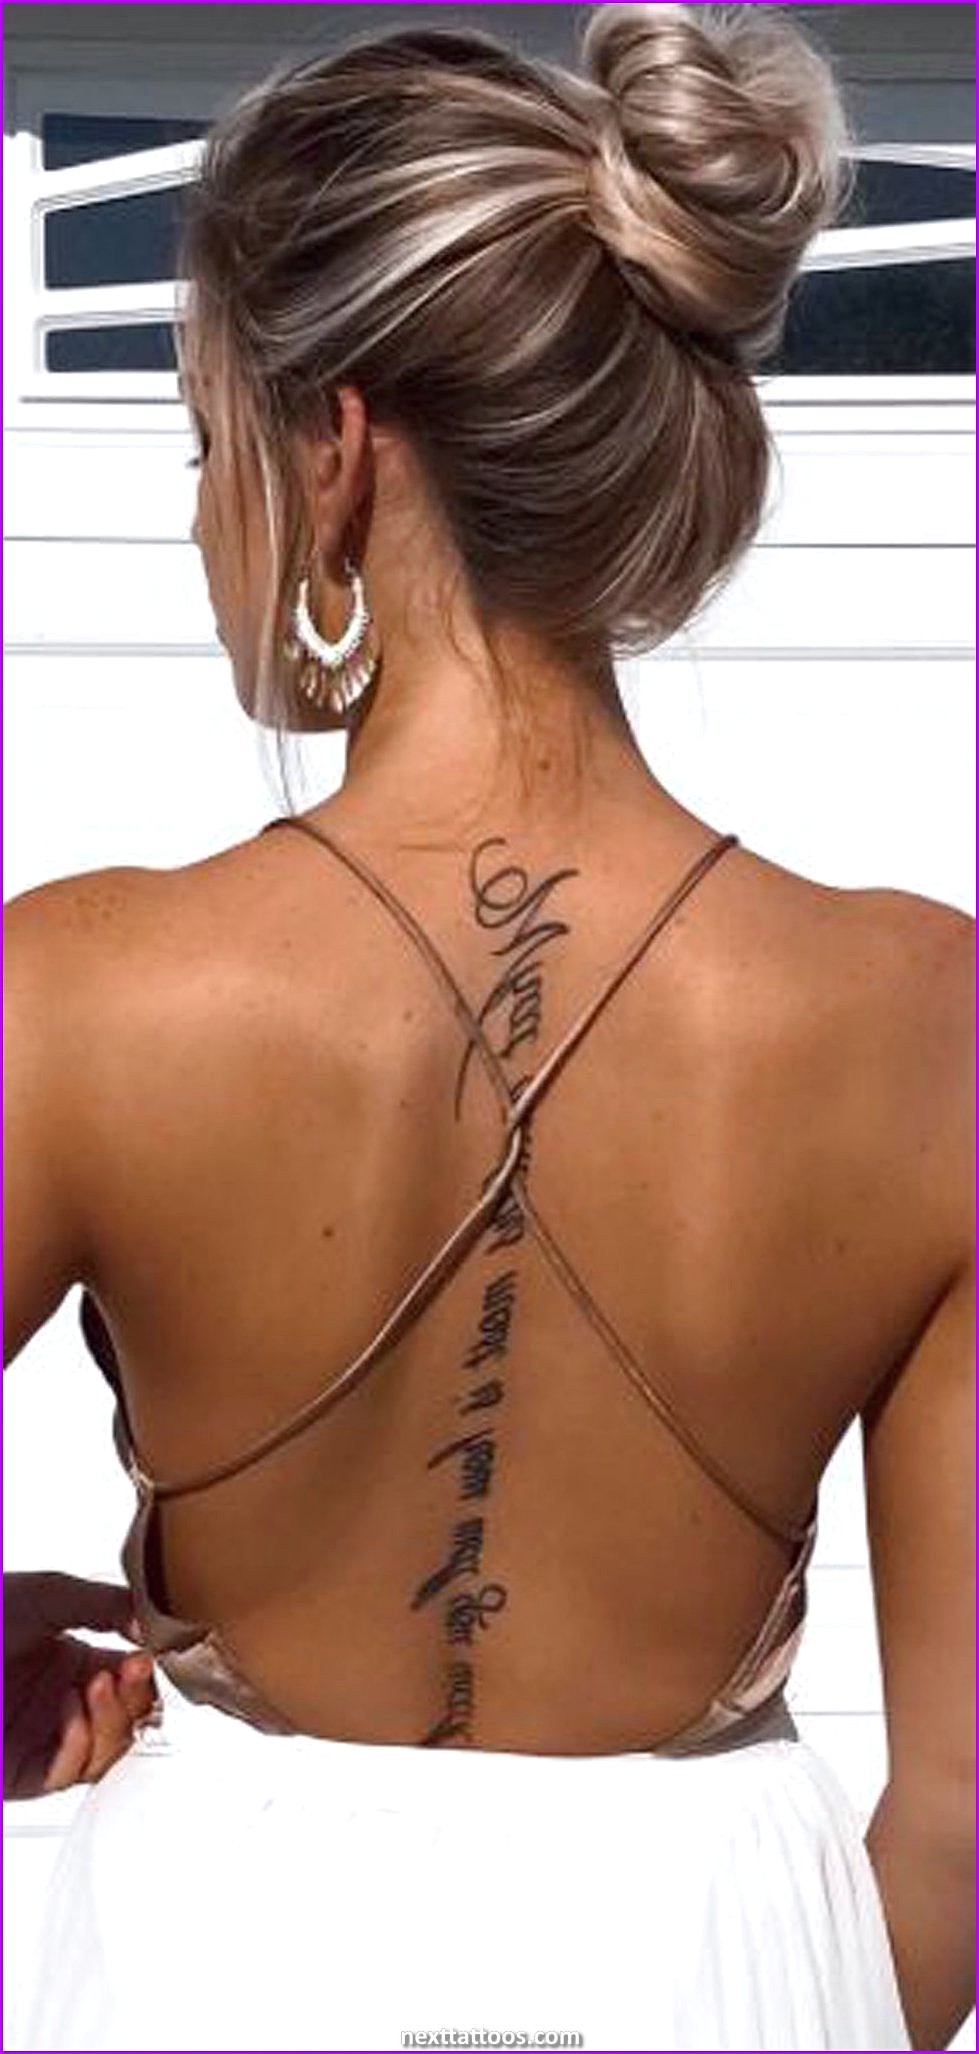 Get a Spine Tattoos Female Quotes